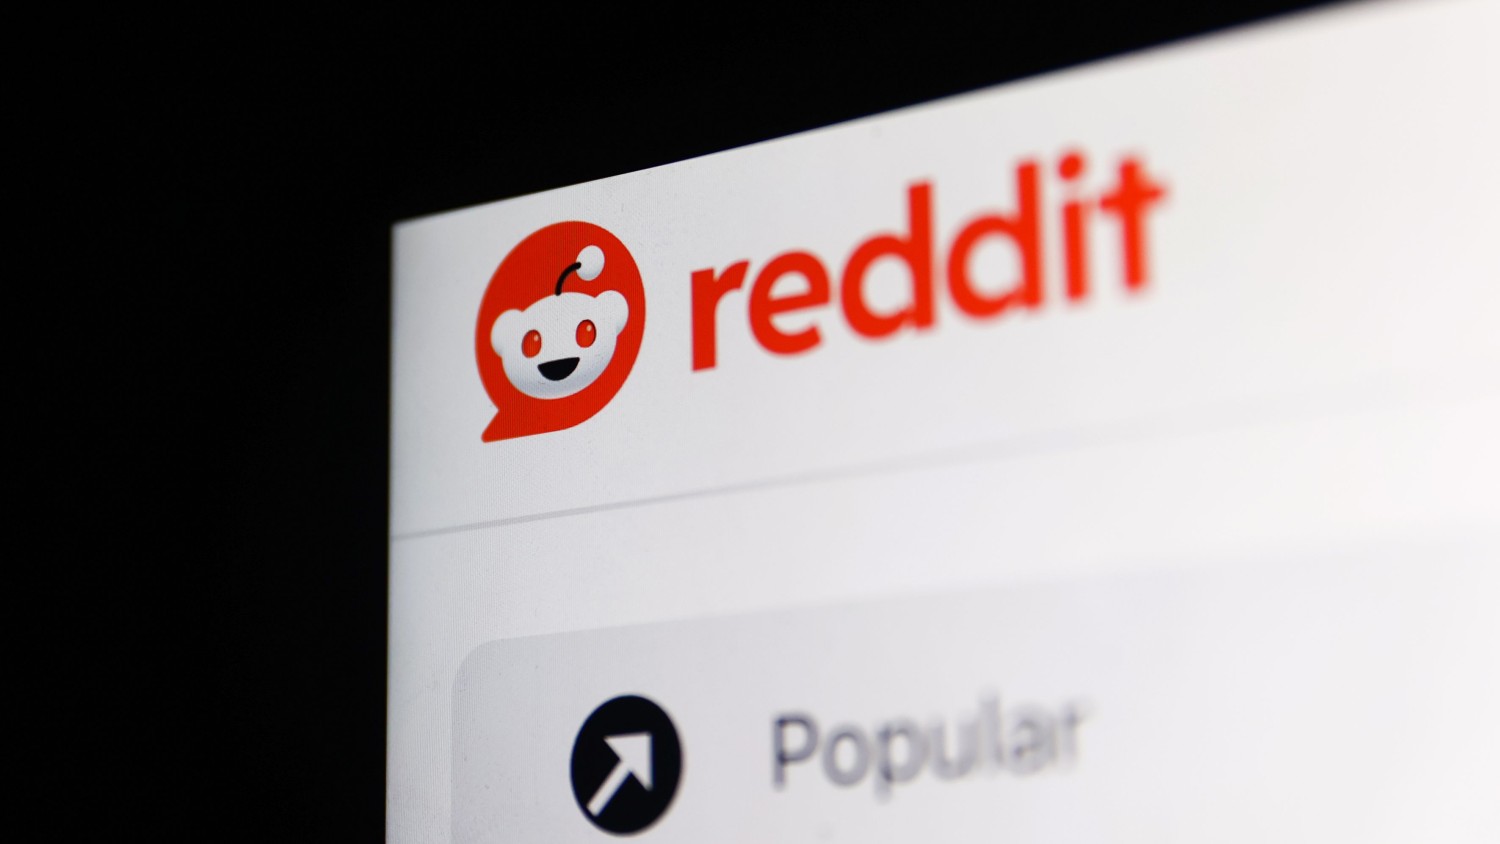 Reddit hasn’t turned a profit in nearly 20 years, but it just filed to go public anyway